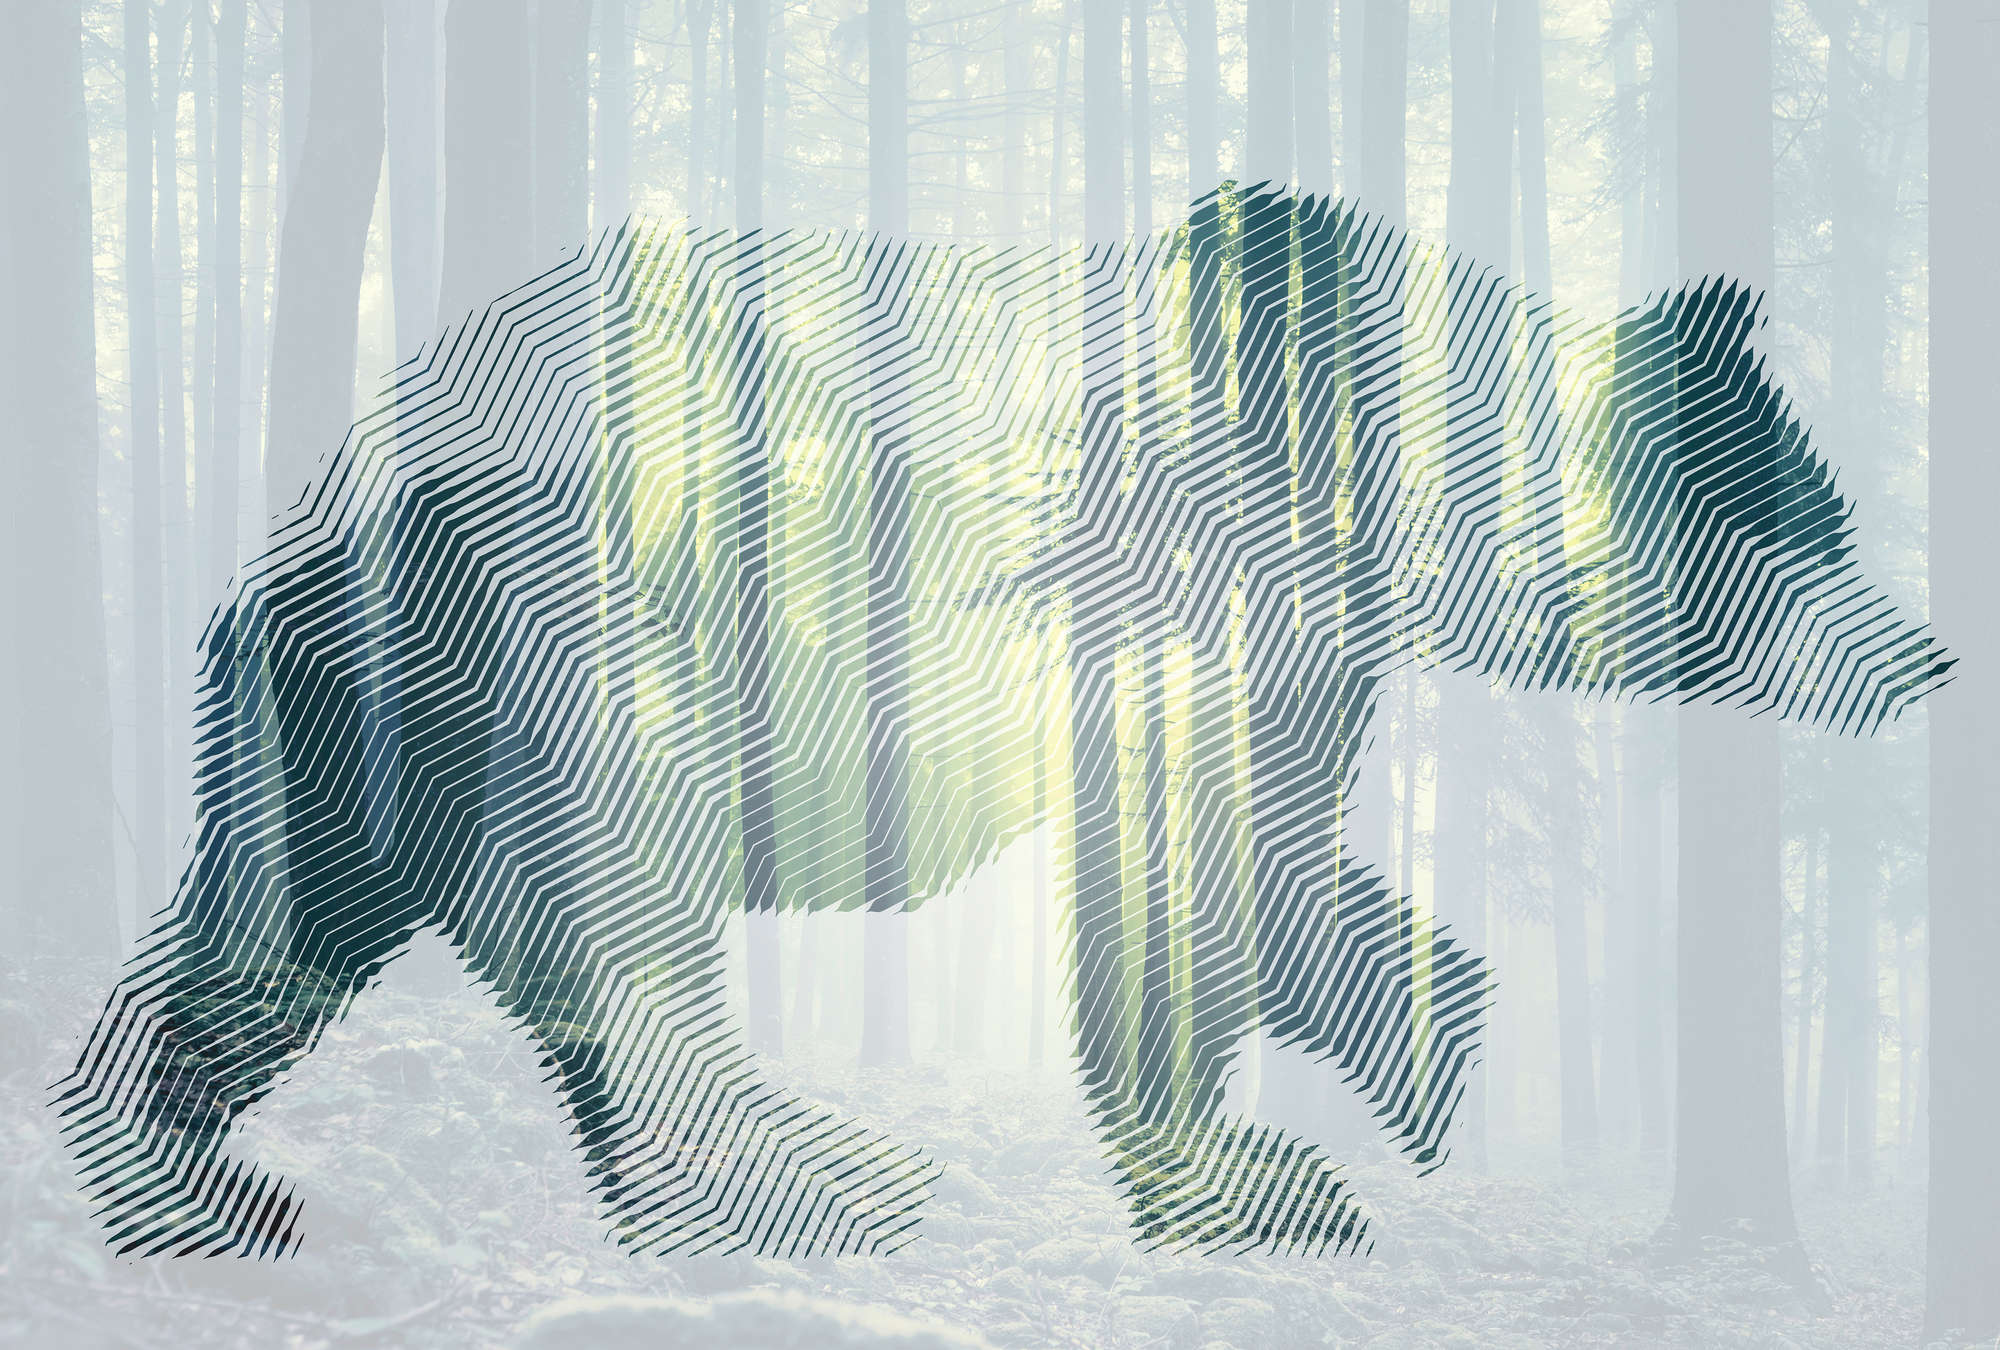             Photo wallpaper forest with bear & graphic design - green, white, yellow
        